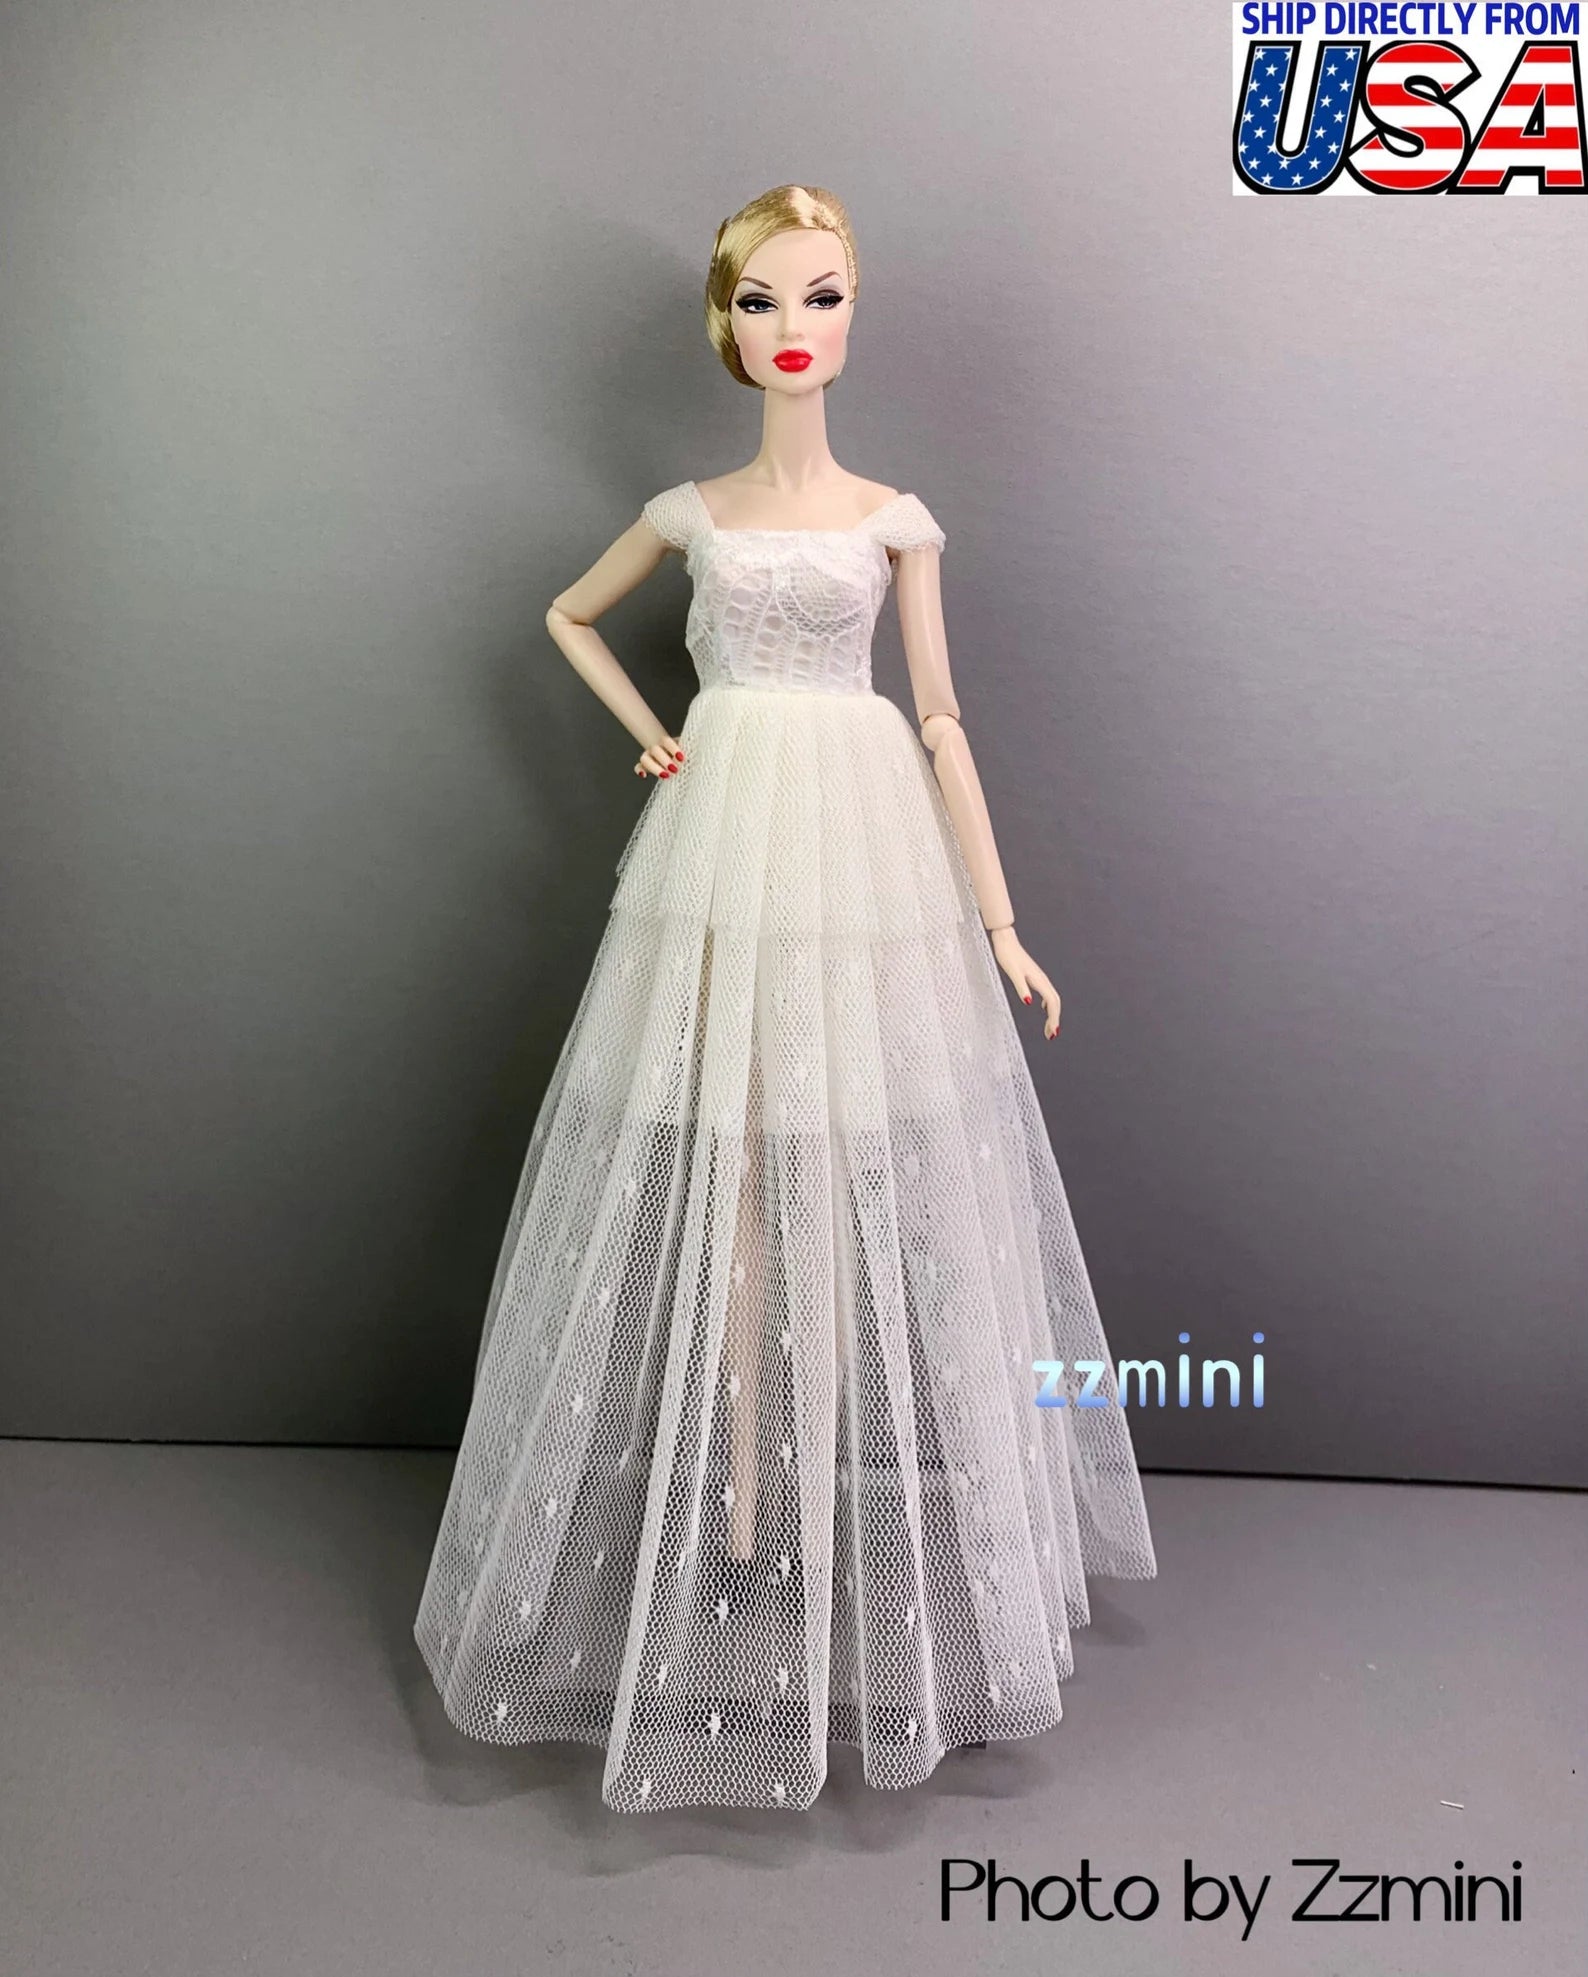 1/6 White Handmade 2 Layers Dress For 11.5'' / 30cm Fashion Doll Clothes Gown Wedding Dress